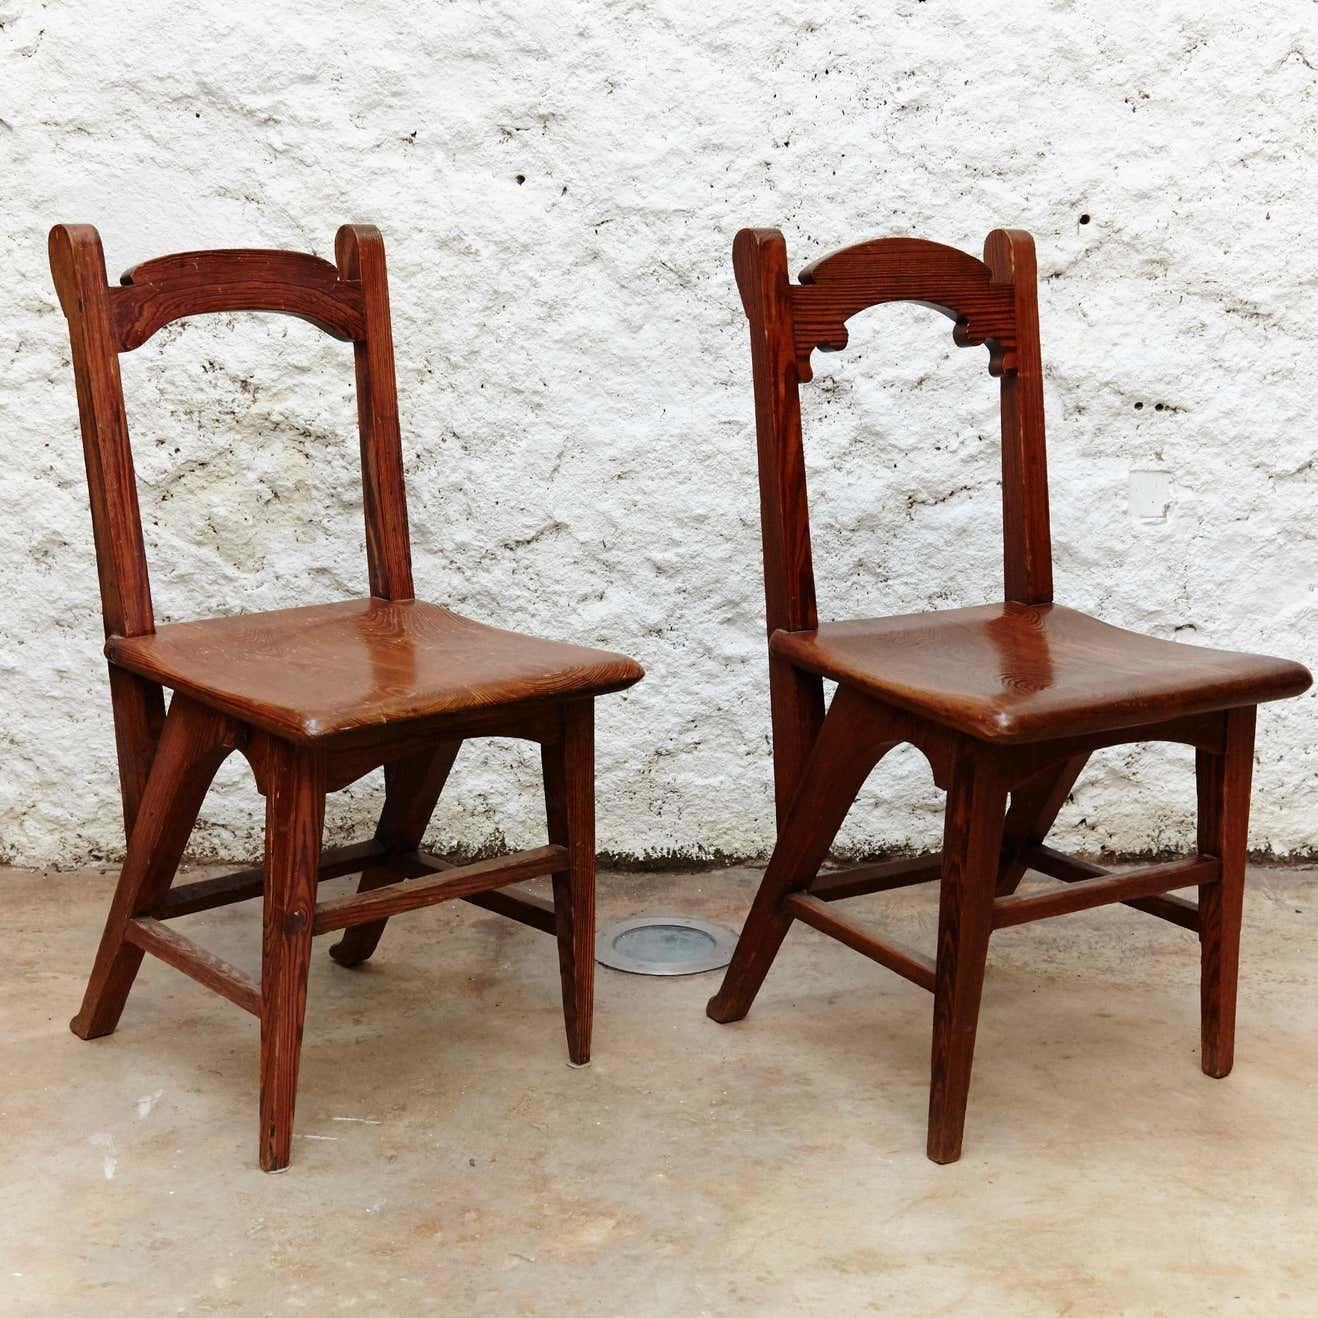 Pair of Cataln modernist wooden chairs,
Designed for the Palace of Justice in Barcelona.
Manufactured circa 1920 in Barcelona (Spain).

In original condition with minor wear consistent of age and use, preserving a beautiful patina.

Both